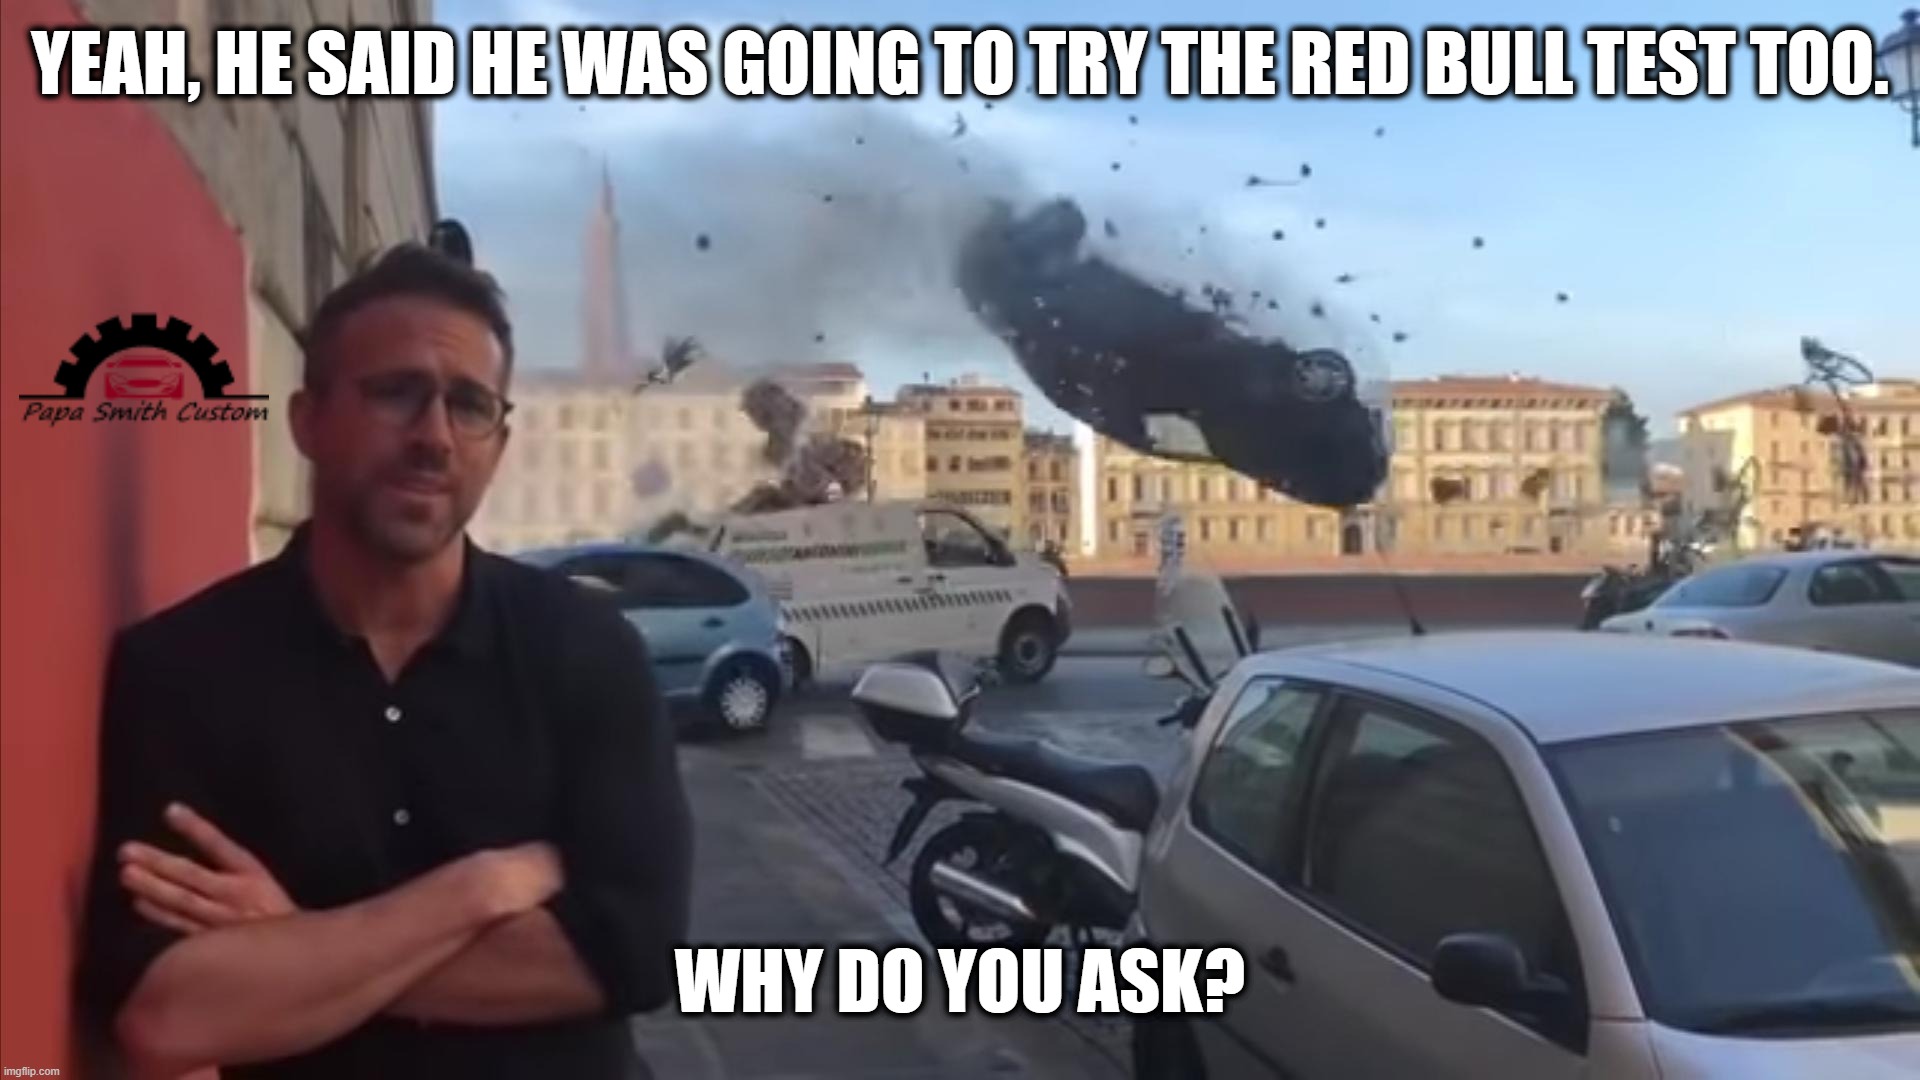 Runs like a dream. |  YEAH, HE SAID HE WAS GOING TO TRY THE RED BULL TEST TOO. WHY DO YOU ASK? | image tagged in ryan car,red bull,test,fuel,flying car,car memes | made w/ Imgflip meme maker